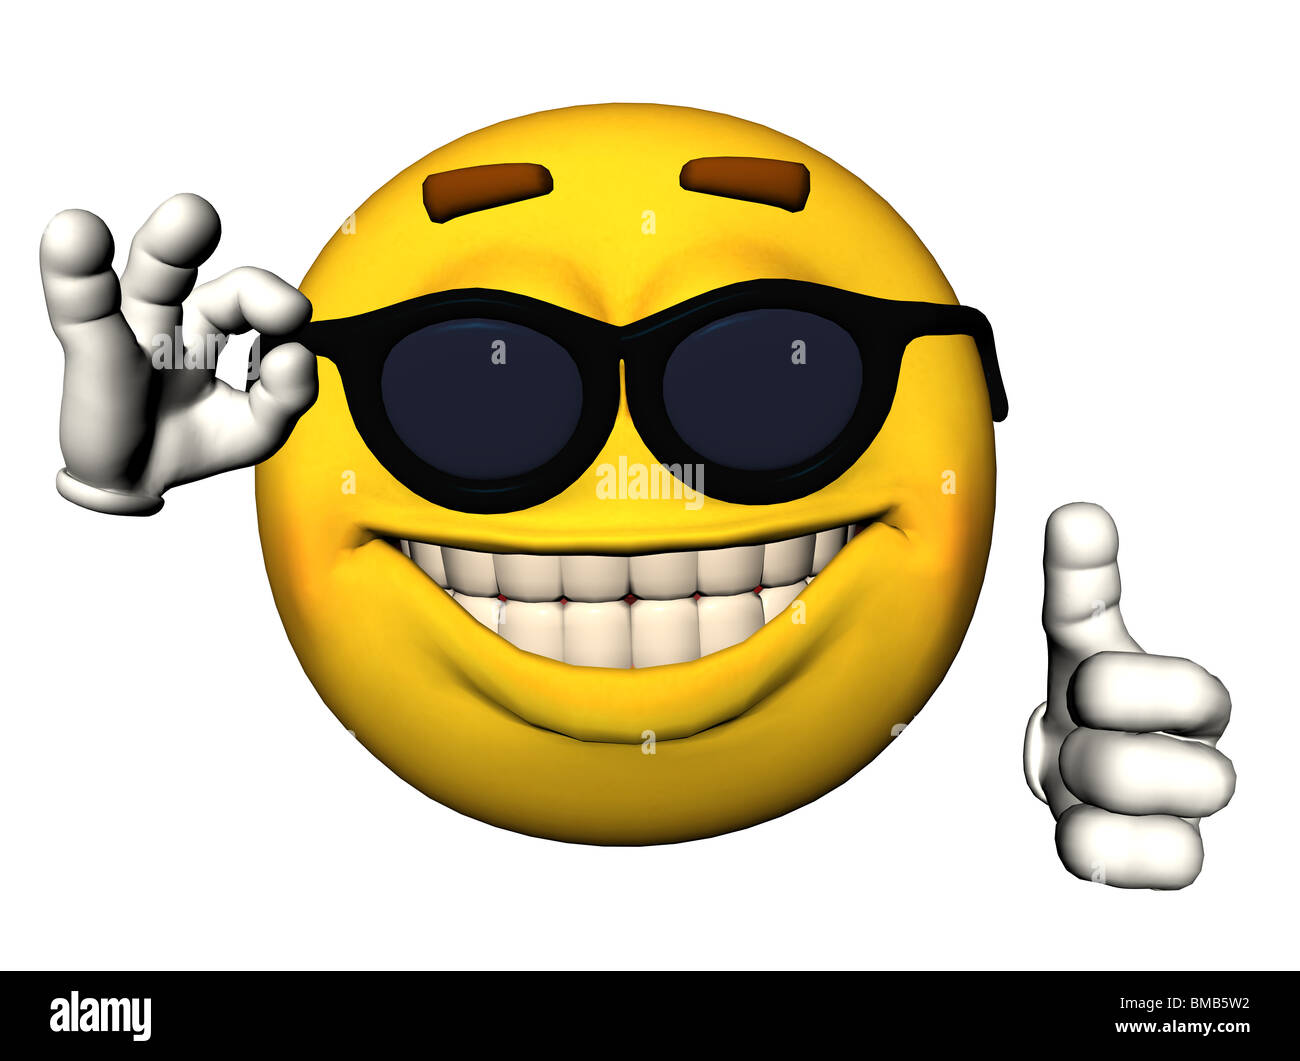 Illustration of a cool emoticon Stock Photo - Alamy